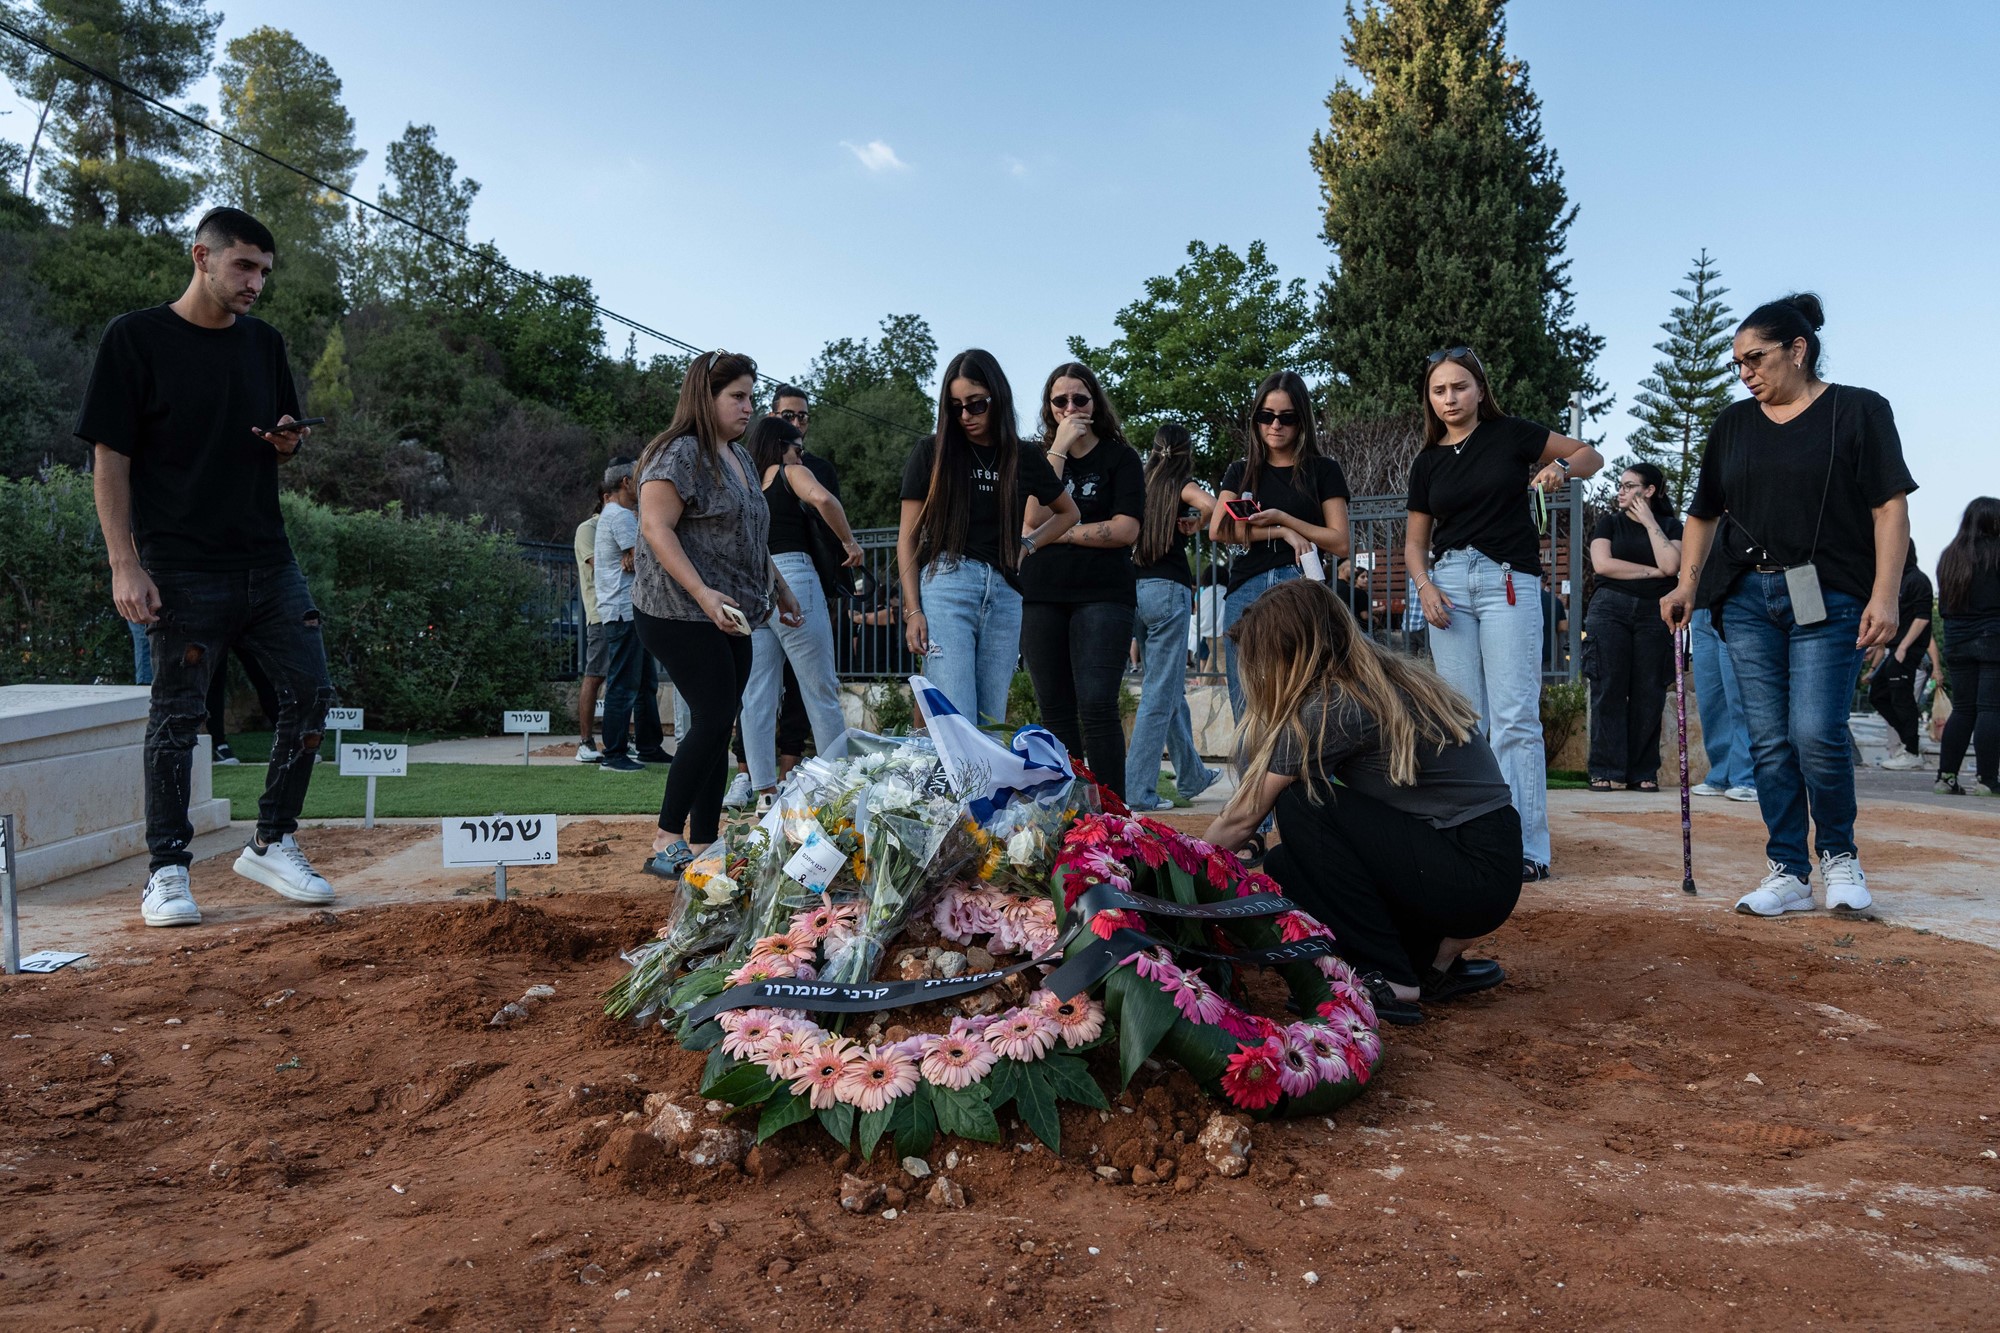 People lay wreaths at a dirt grave, as several others wearing black Tshirts and jeans watch on